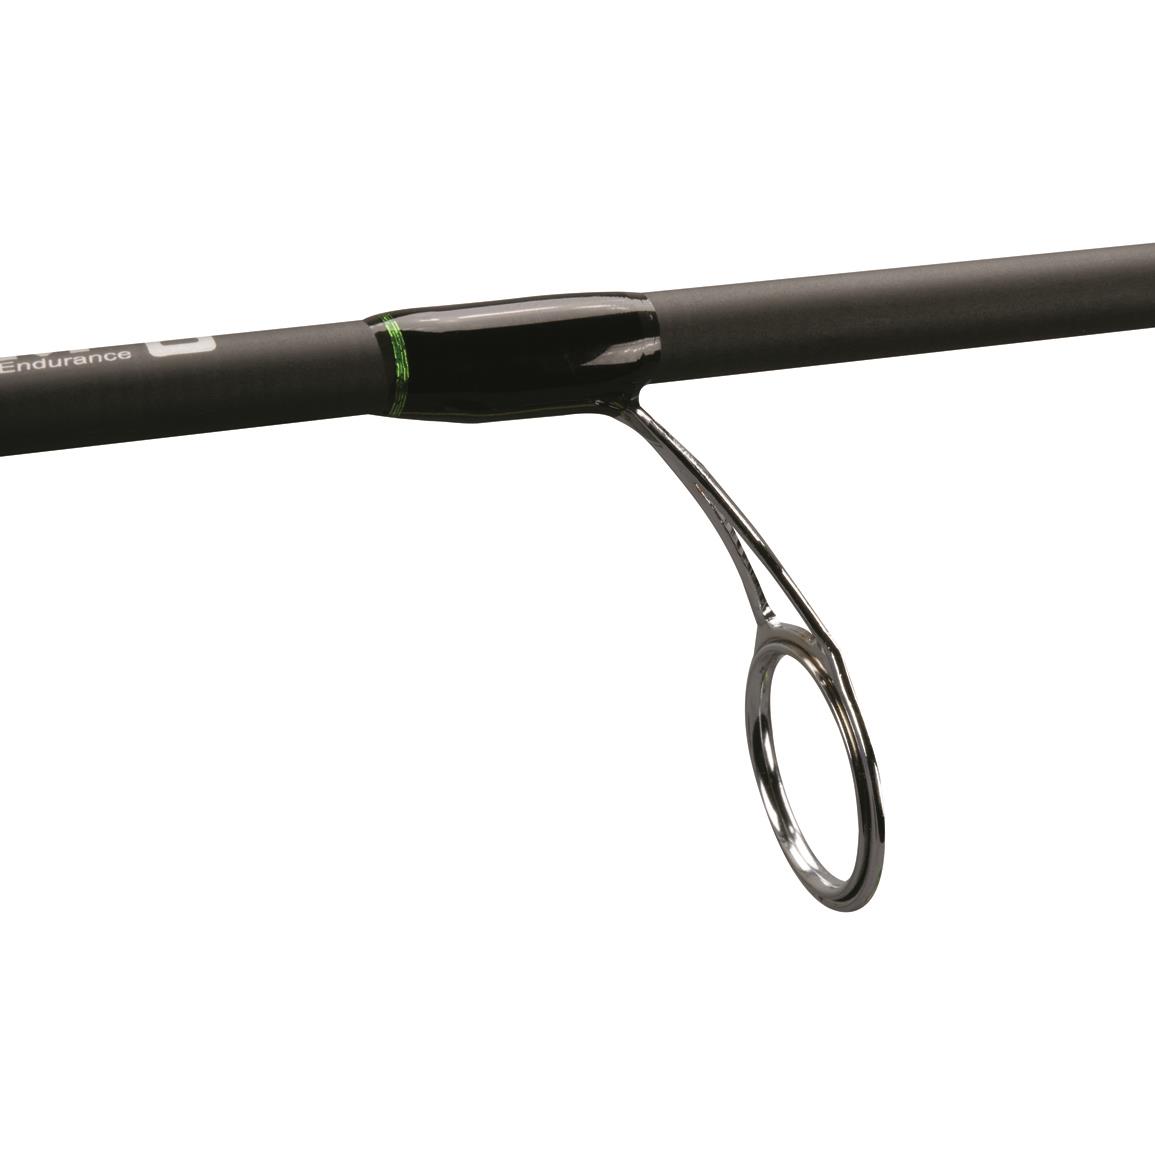 Zebco / Quantum Crappie Fighter Spinning Combo 12' Length, 2 Piece Rod,  4.3:1 Gear Ratio, 1 Bearings, Ambidextrous